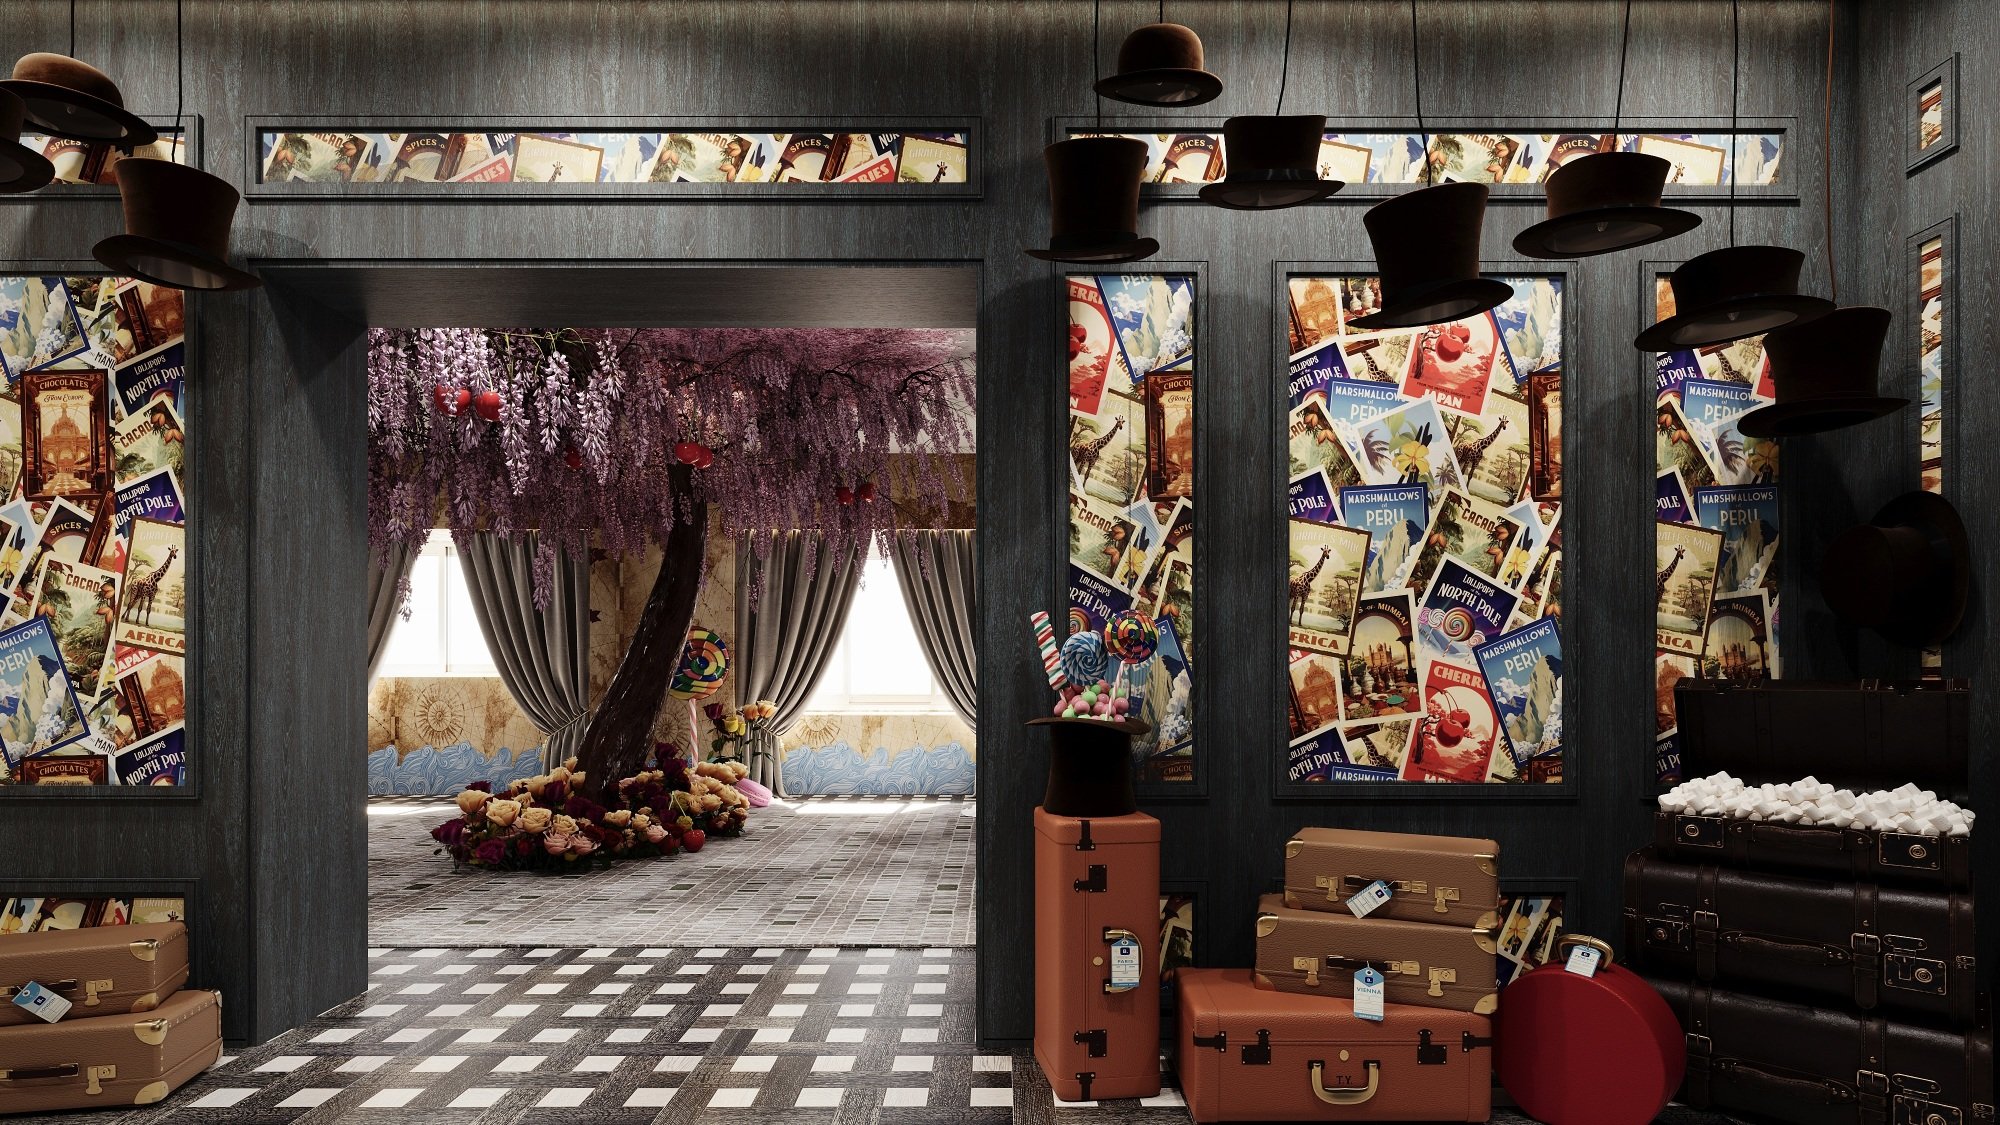 A "Wonka"-themed hotel suite, including a large chocolate tree, vintage travel posters, floating top hats, and a trunk full of marshmallows.